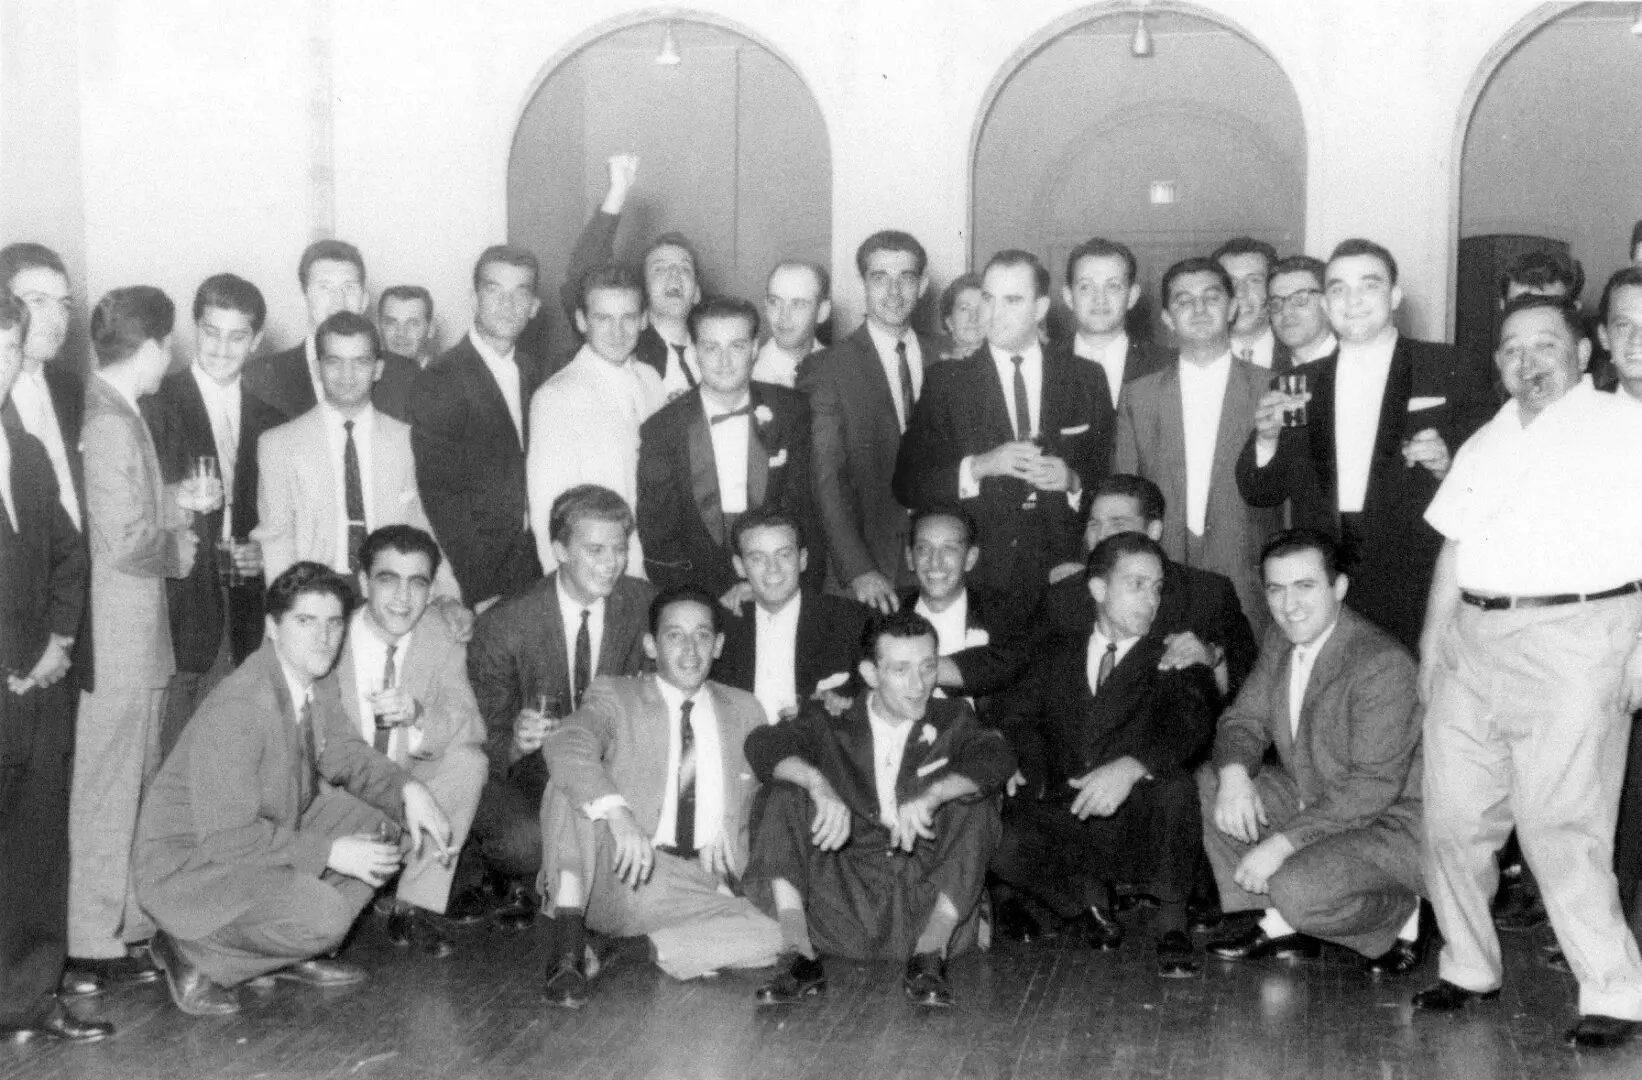 A group of men in suits and ties posing for the camera.